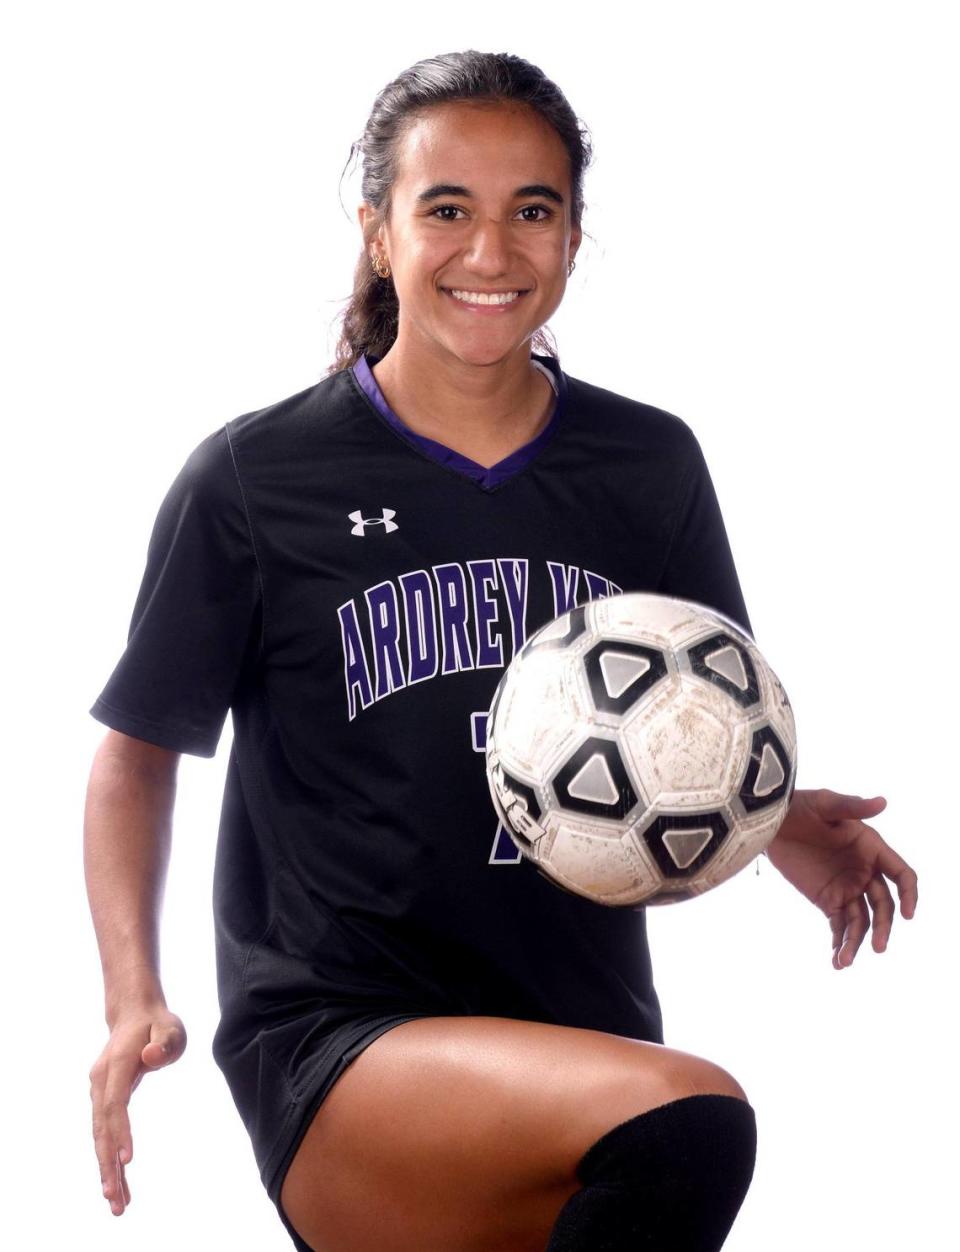 The Charlotte Observer High School Athletes of the Year. Girls Athlete of the Year: Taylor Suarez of Ardrey Kell High School, All-American on track to be a US Olympian in soccer.